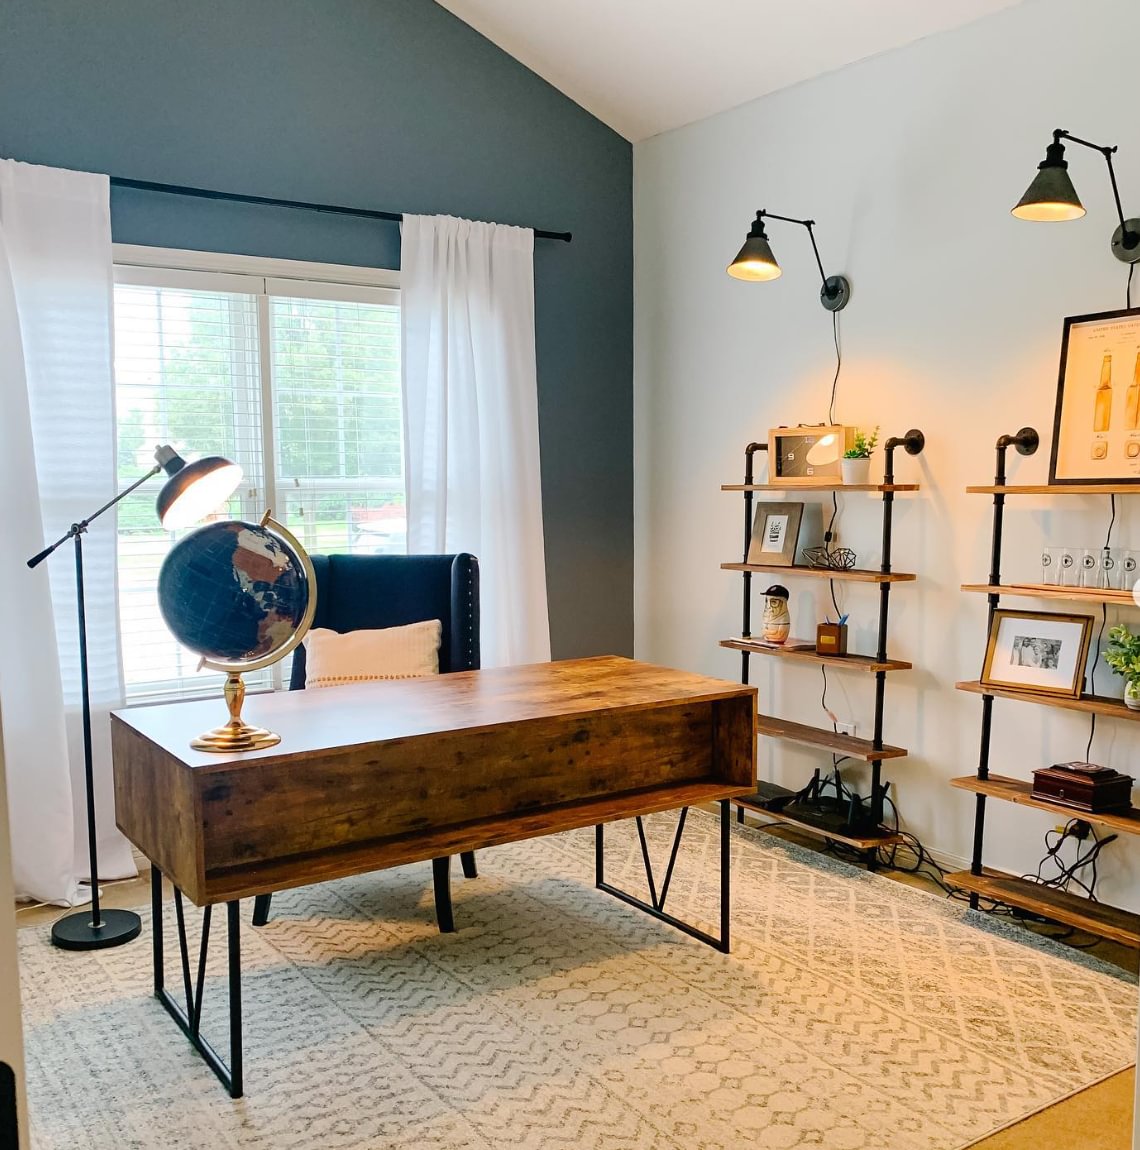 A home office with a wooden desk, rug, and industrial shelving